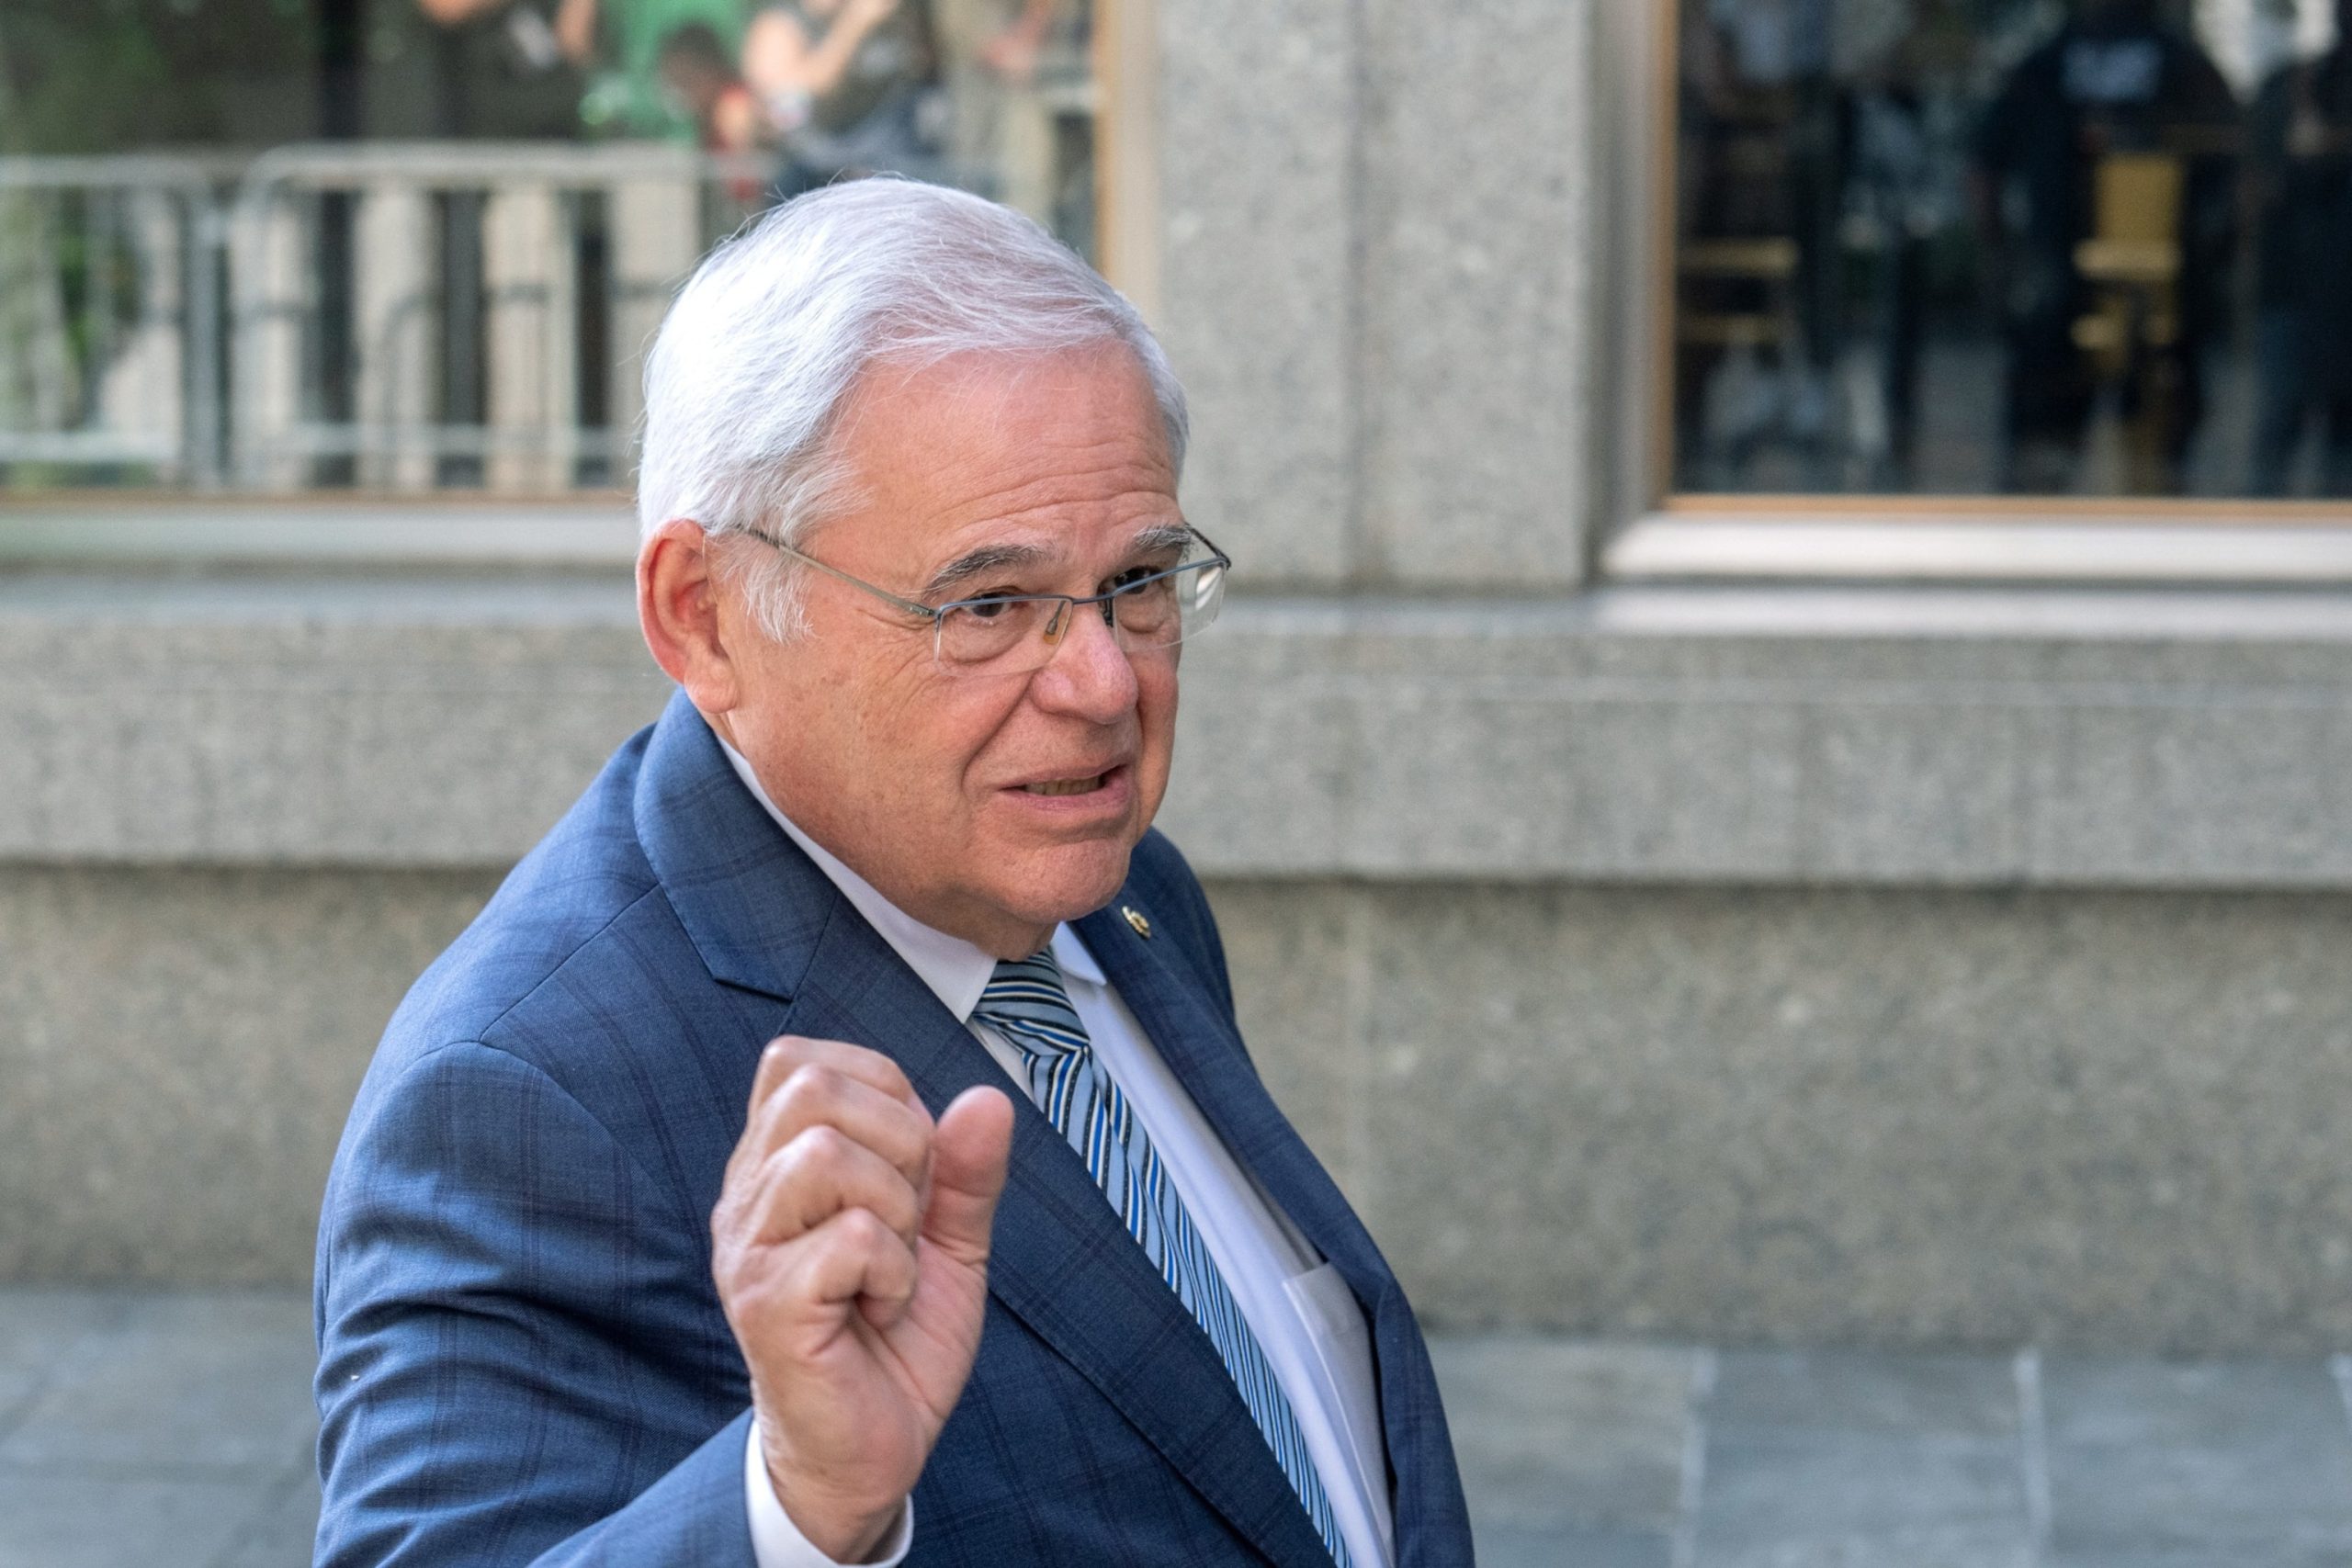 Prosecutor alleges Sen. Bob Menendez abused his office for personal gain, claims in closing argument